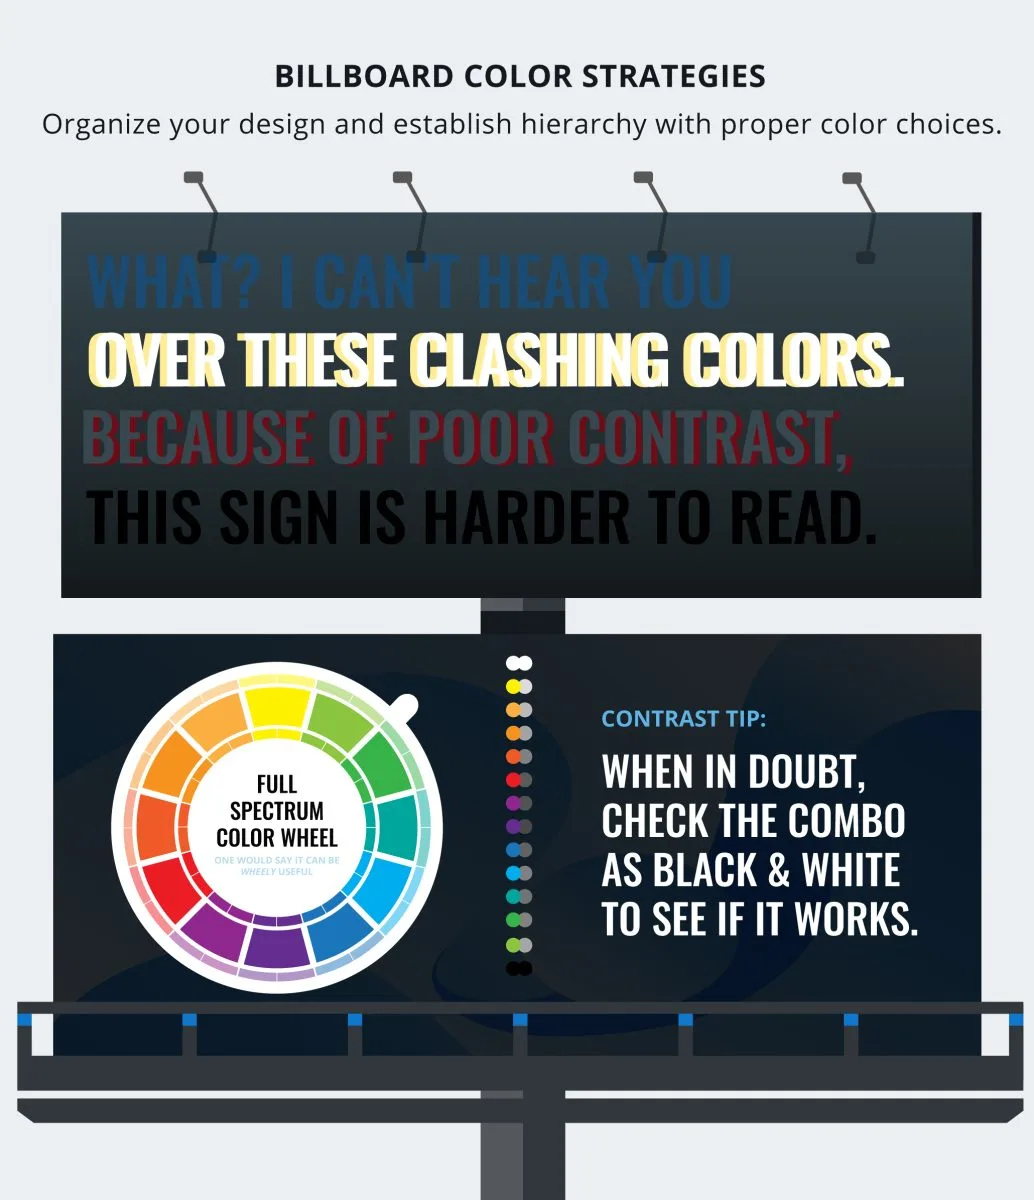 infographic on billboard color strategies